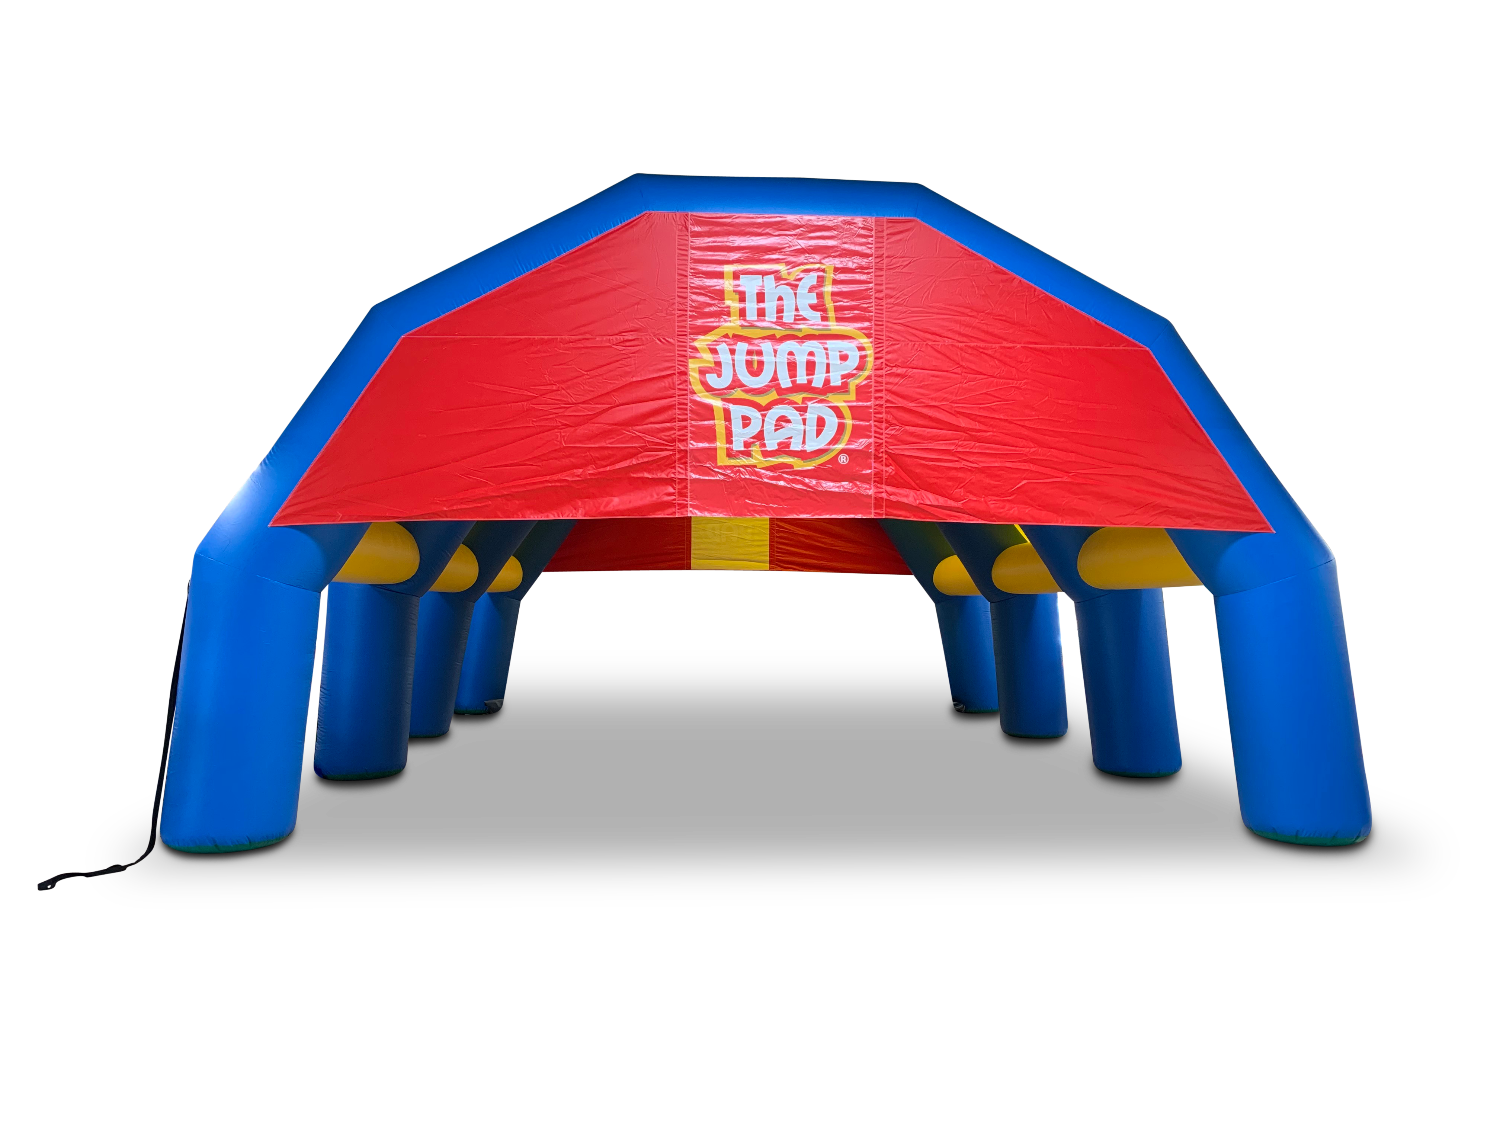 30x30 Inflatable Tent